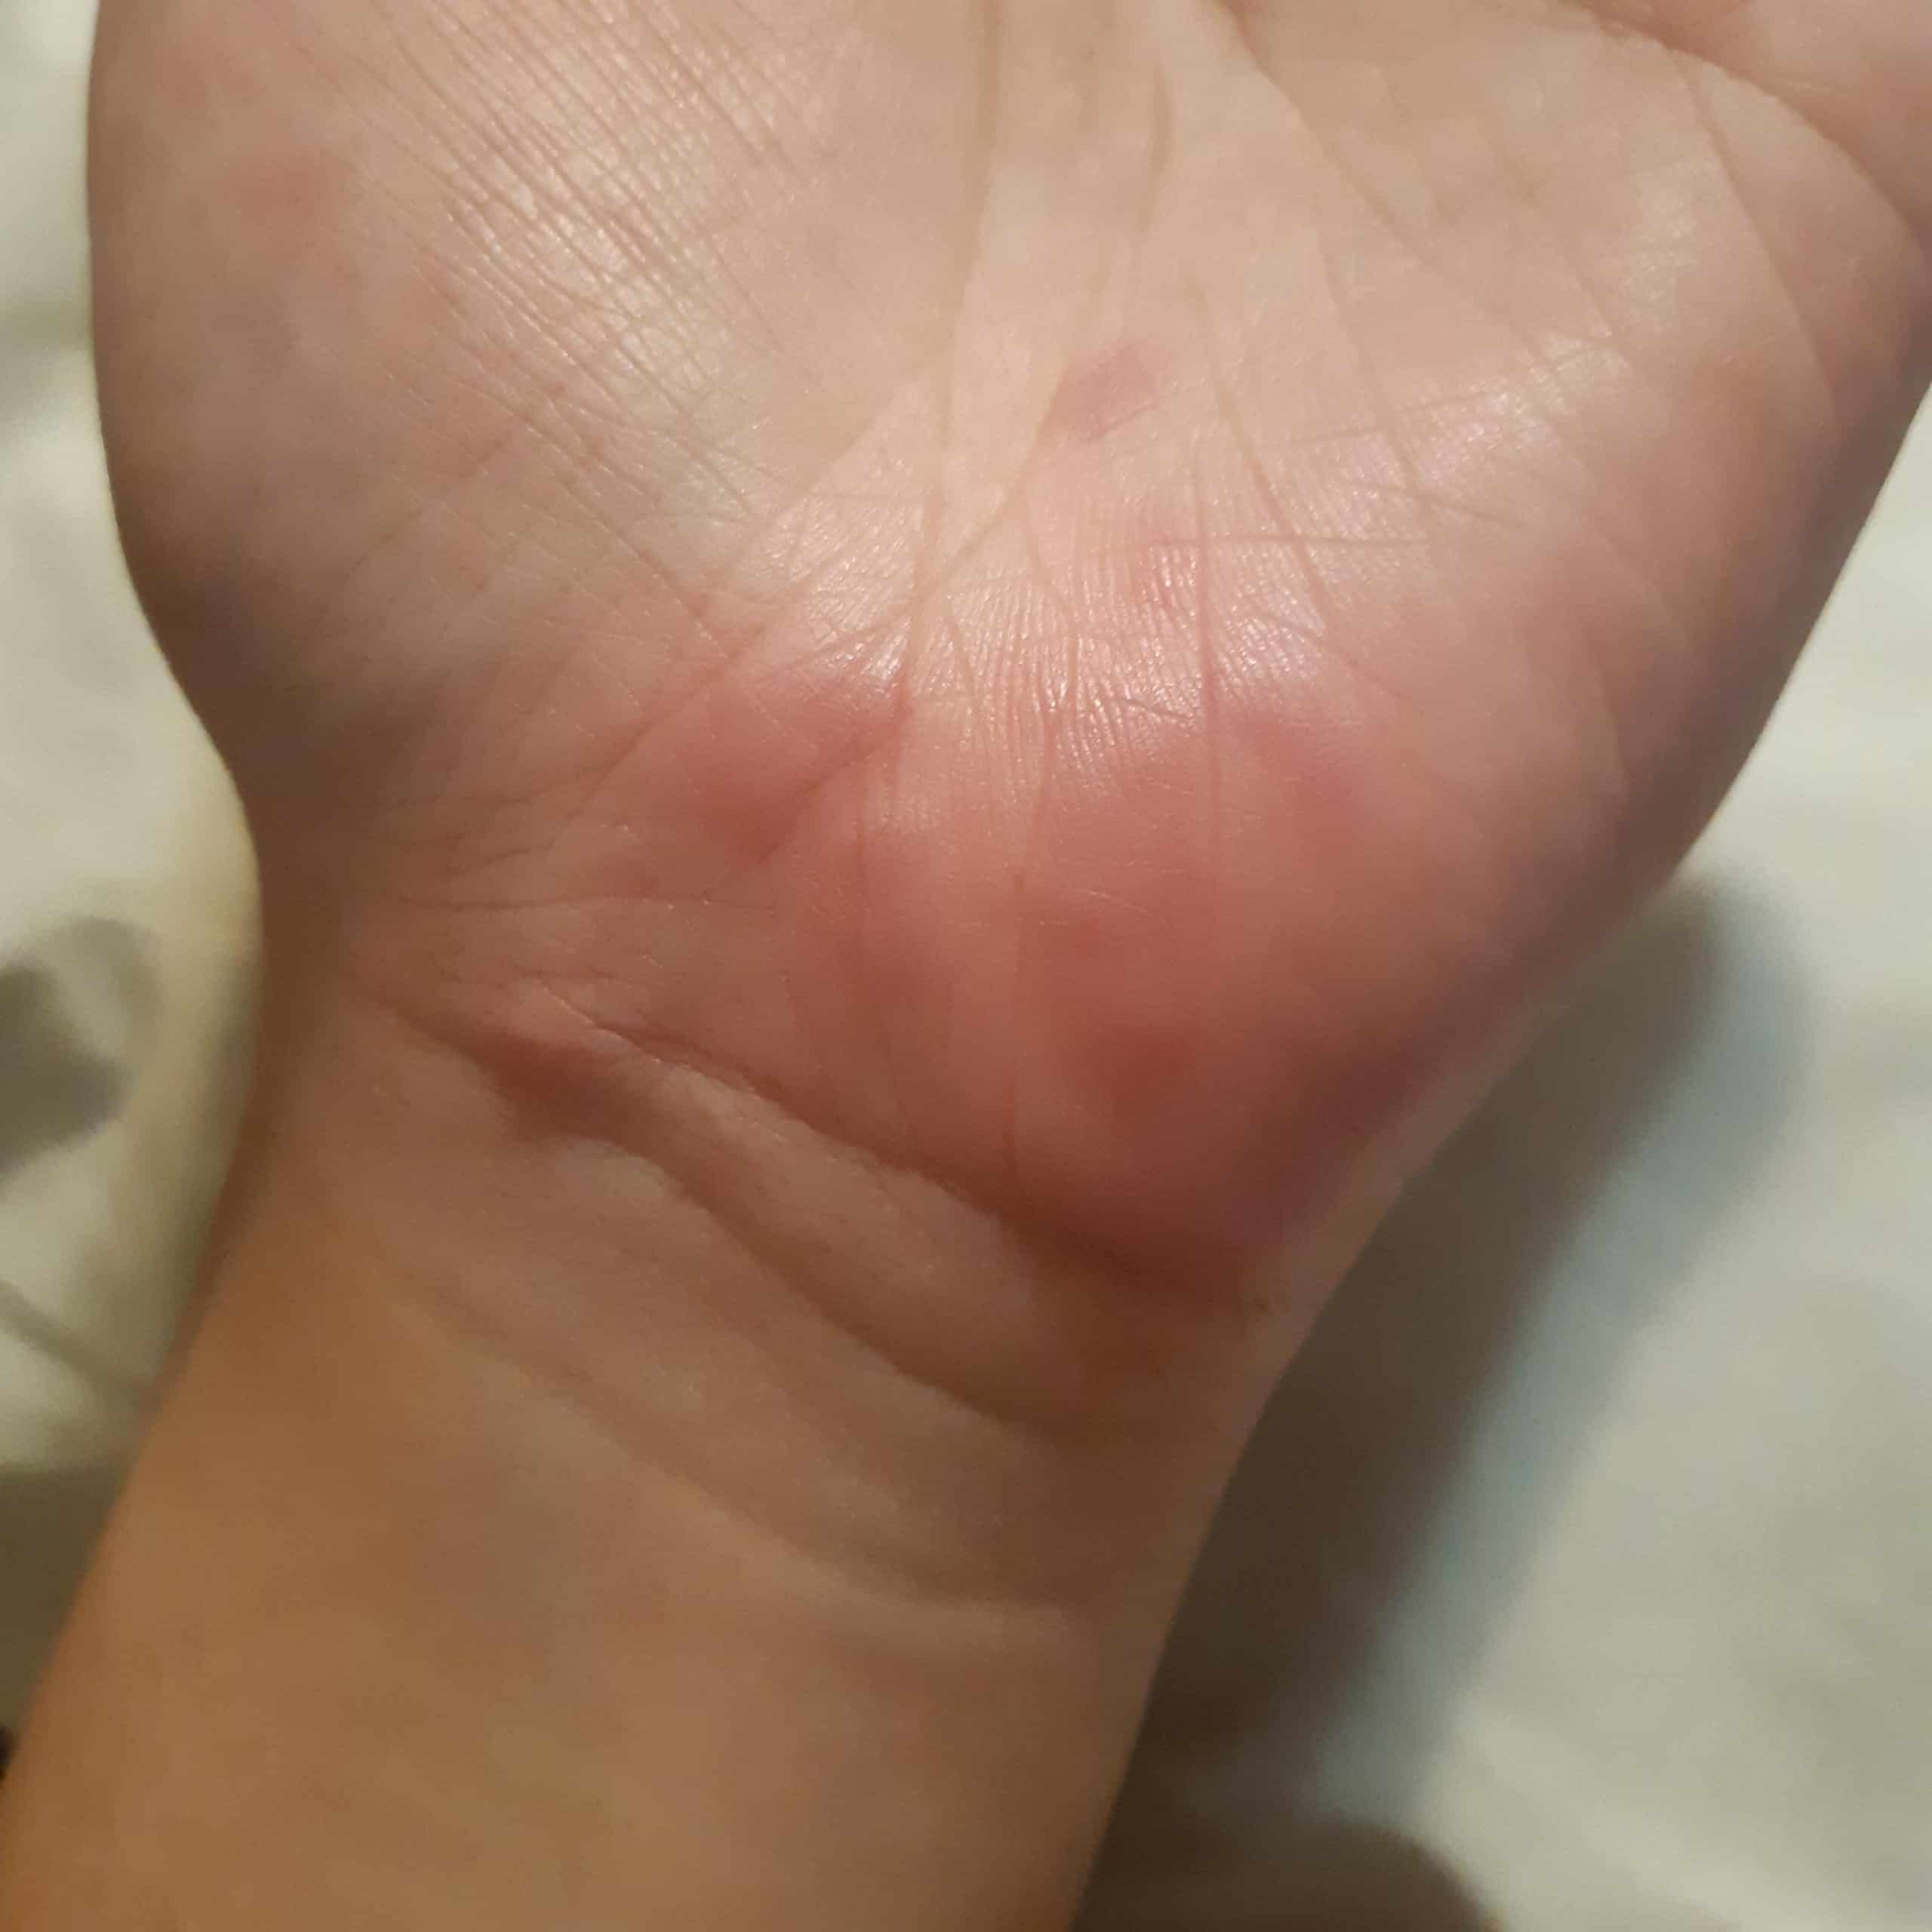 First time here. Does this look like dyshidrotic eczema? : Dyshidrosis